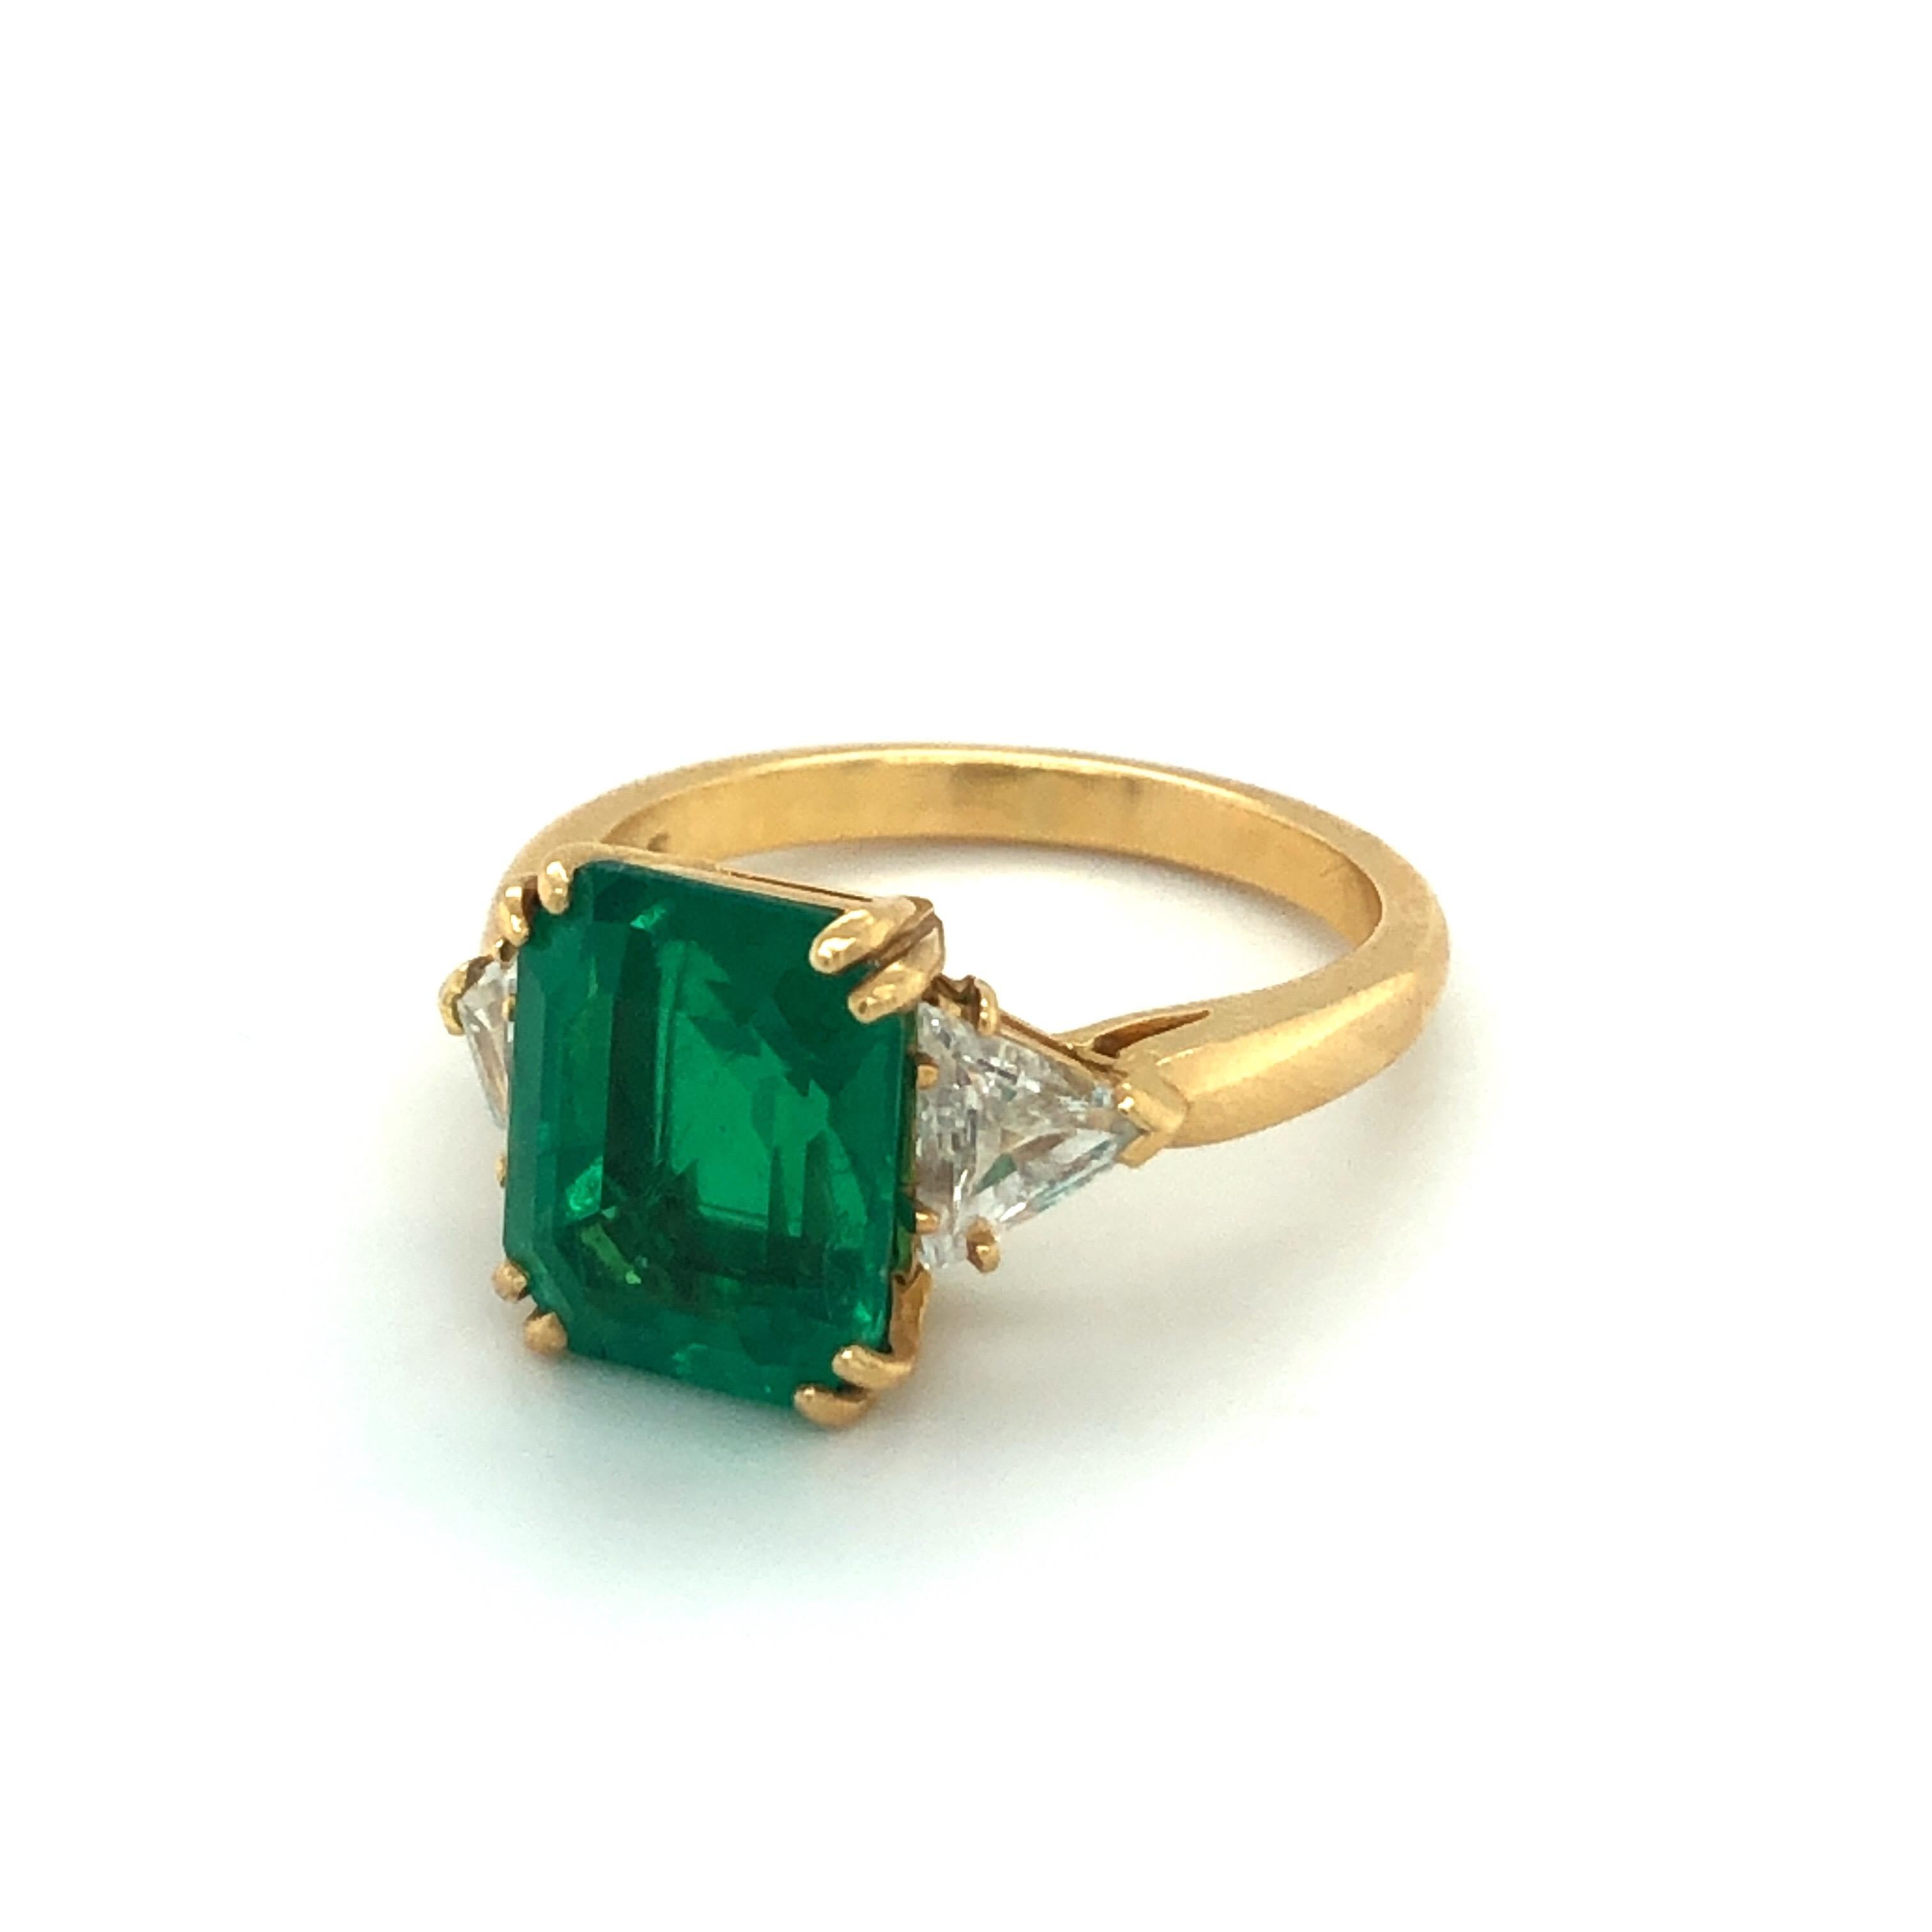 Wonderful 18 karat yellow gold emerald diamond three stone ring by the famous Parisian jewelry house Boucheron.
This classic three stone ring is set with a vivid, evenly colored Colombian emerald of 3.89 carats sided by two triangular diamonds